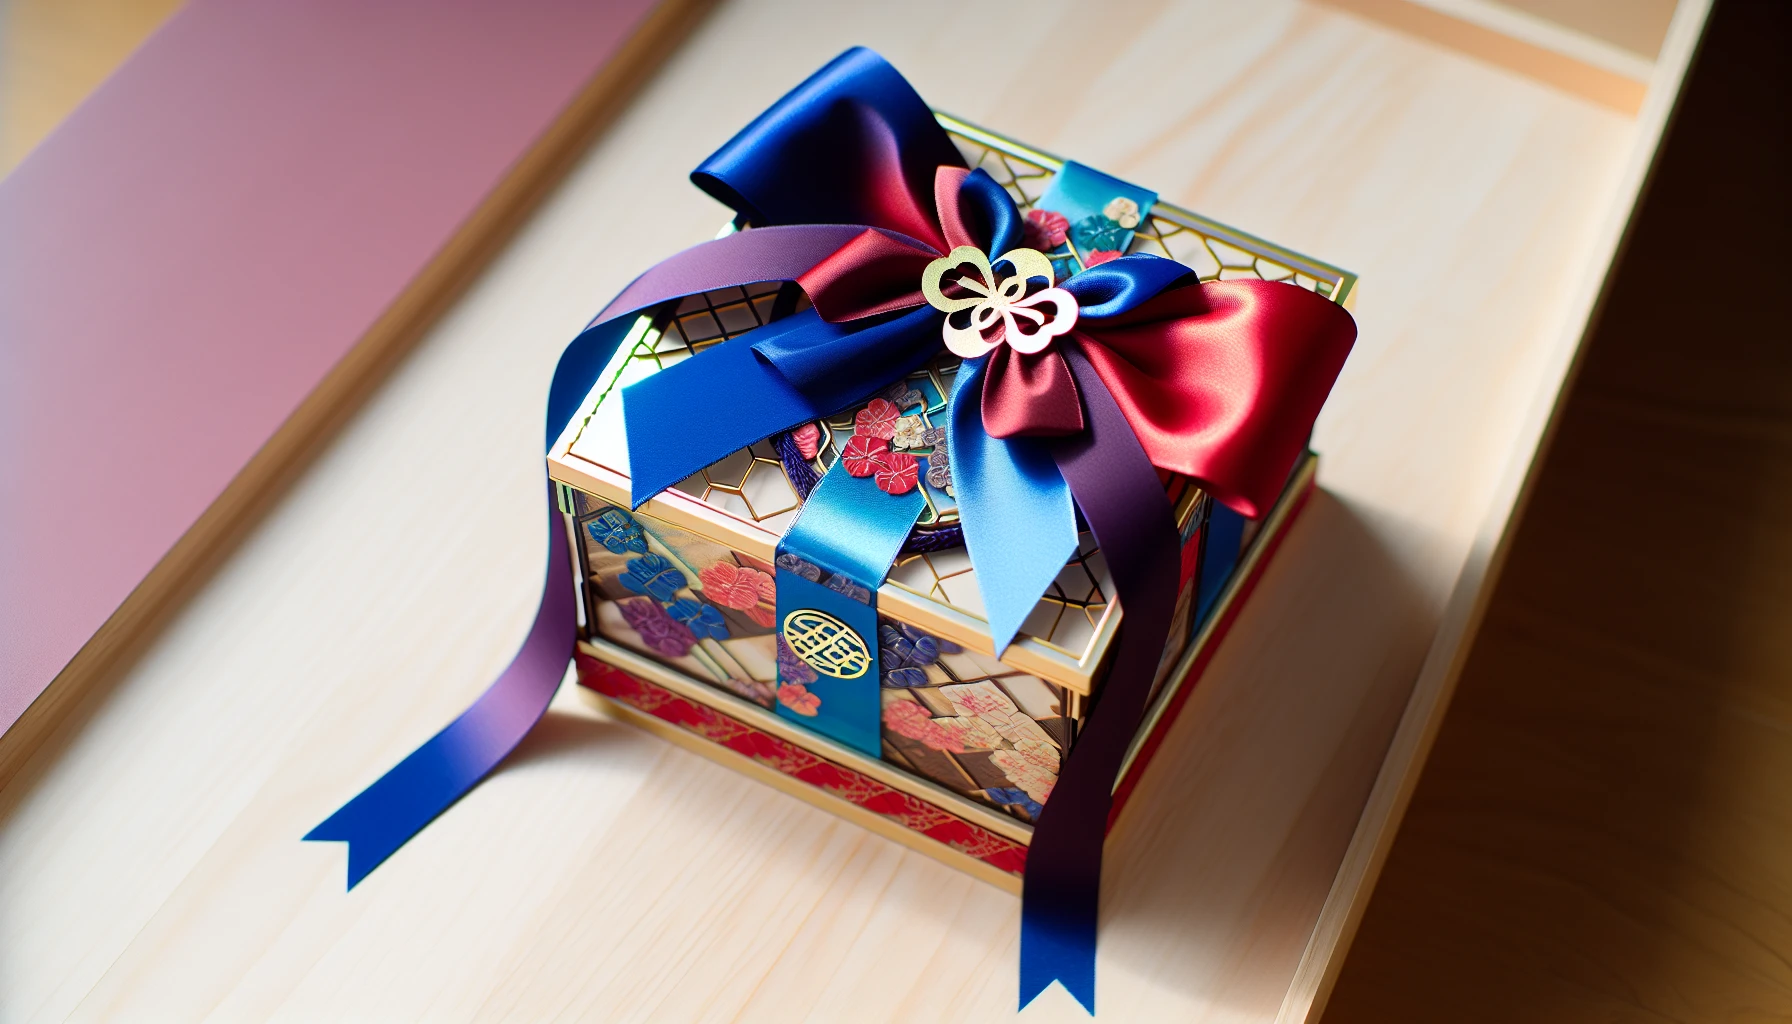 Customized bento cake box with decorative ribbons and personalized message